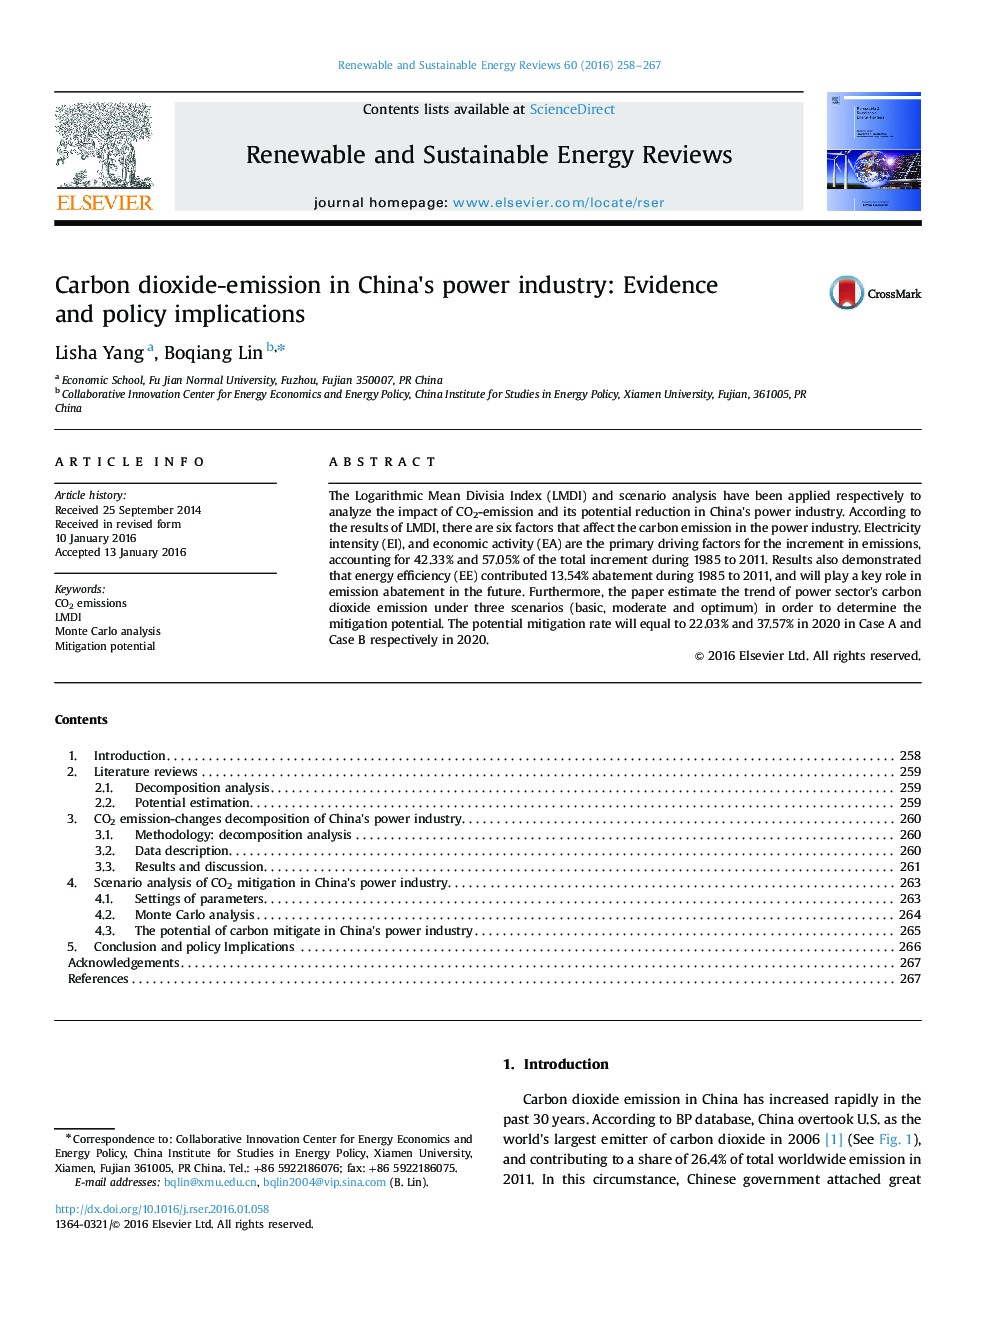 Carbon dioxide-emission in China×³s power industry: Evidence and policy implications